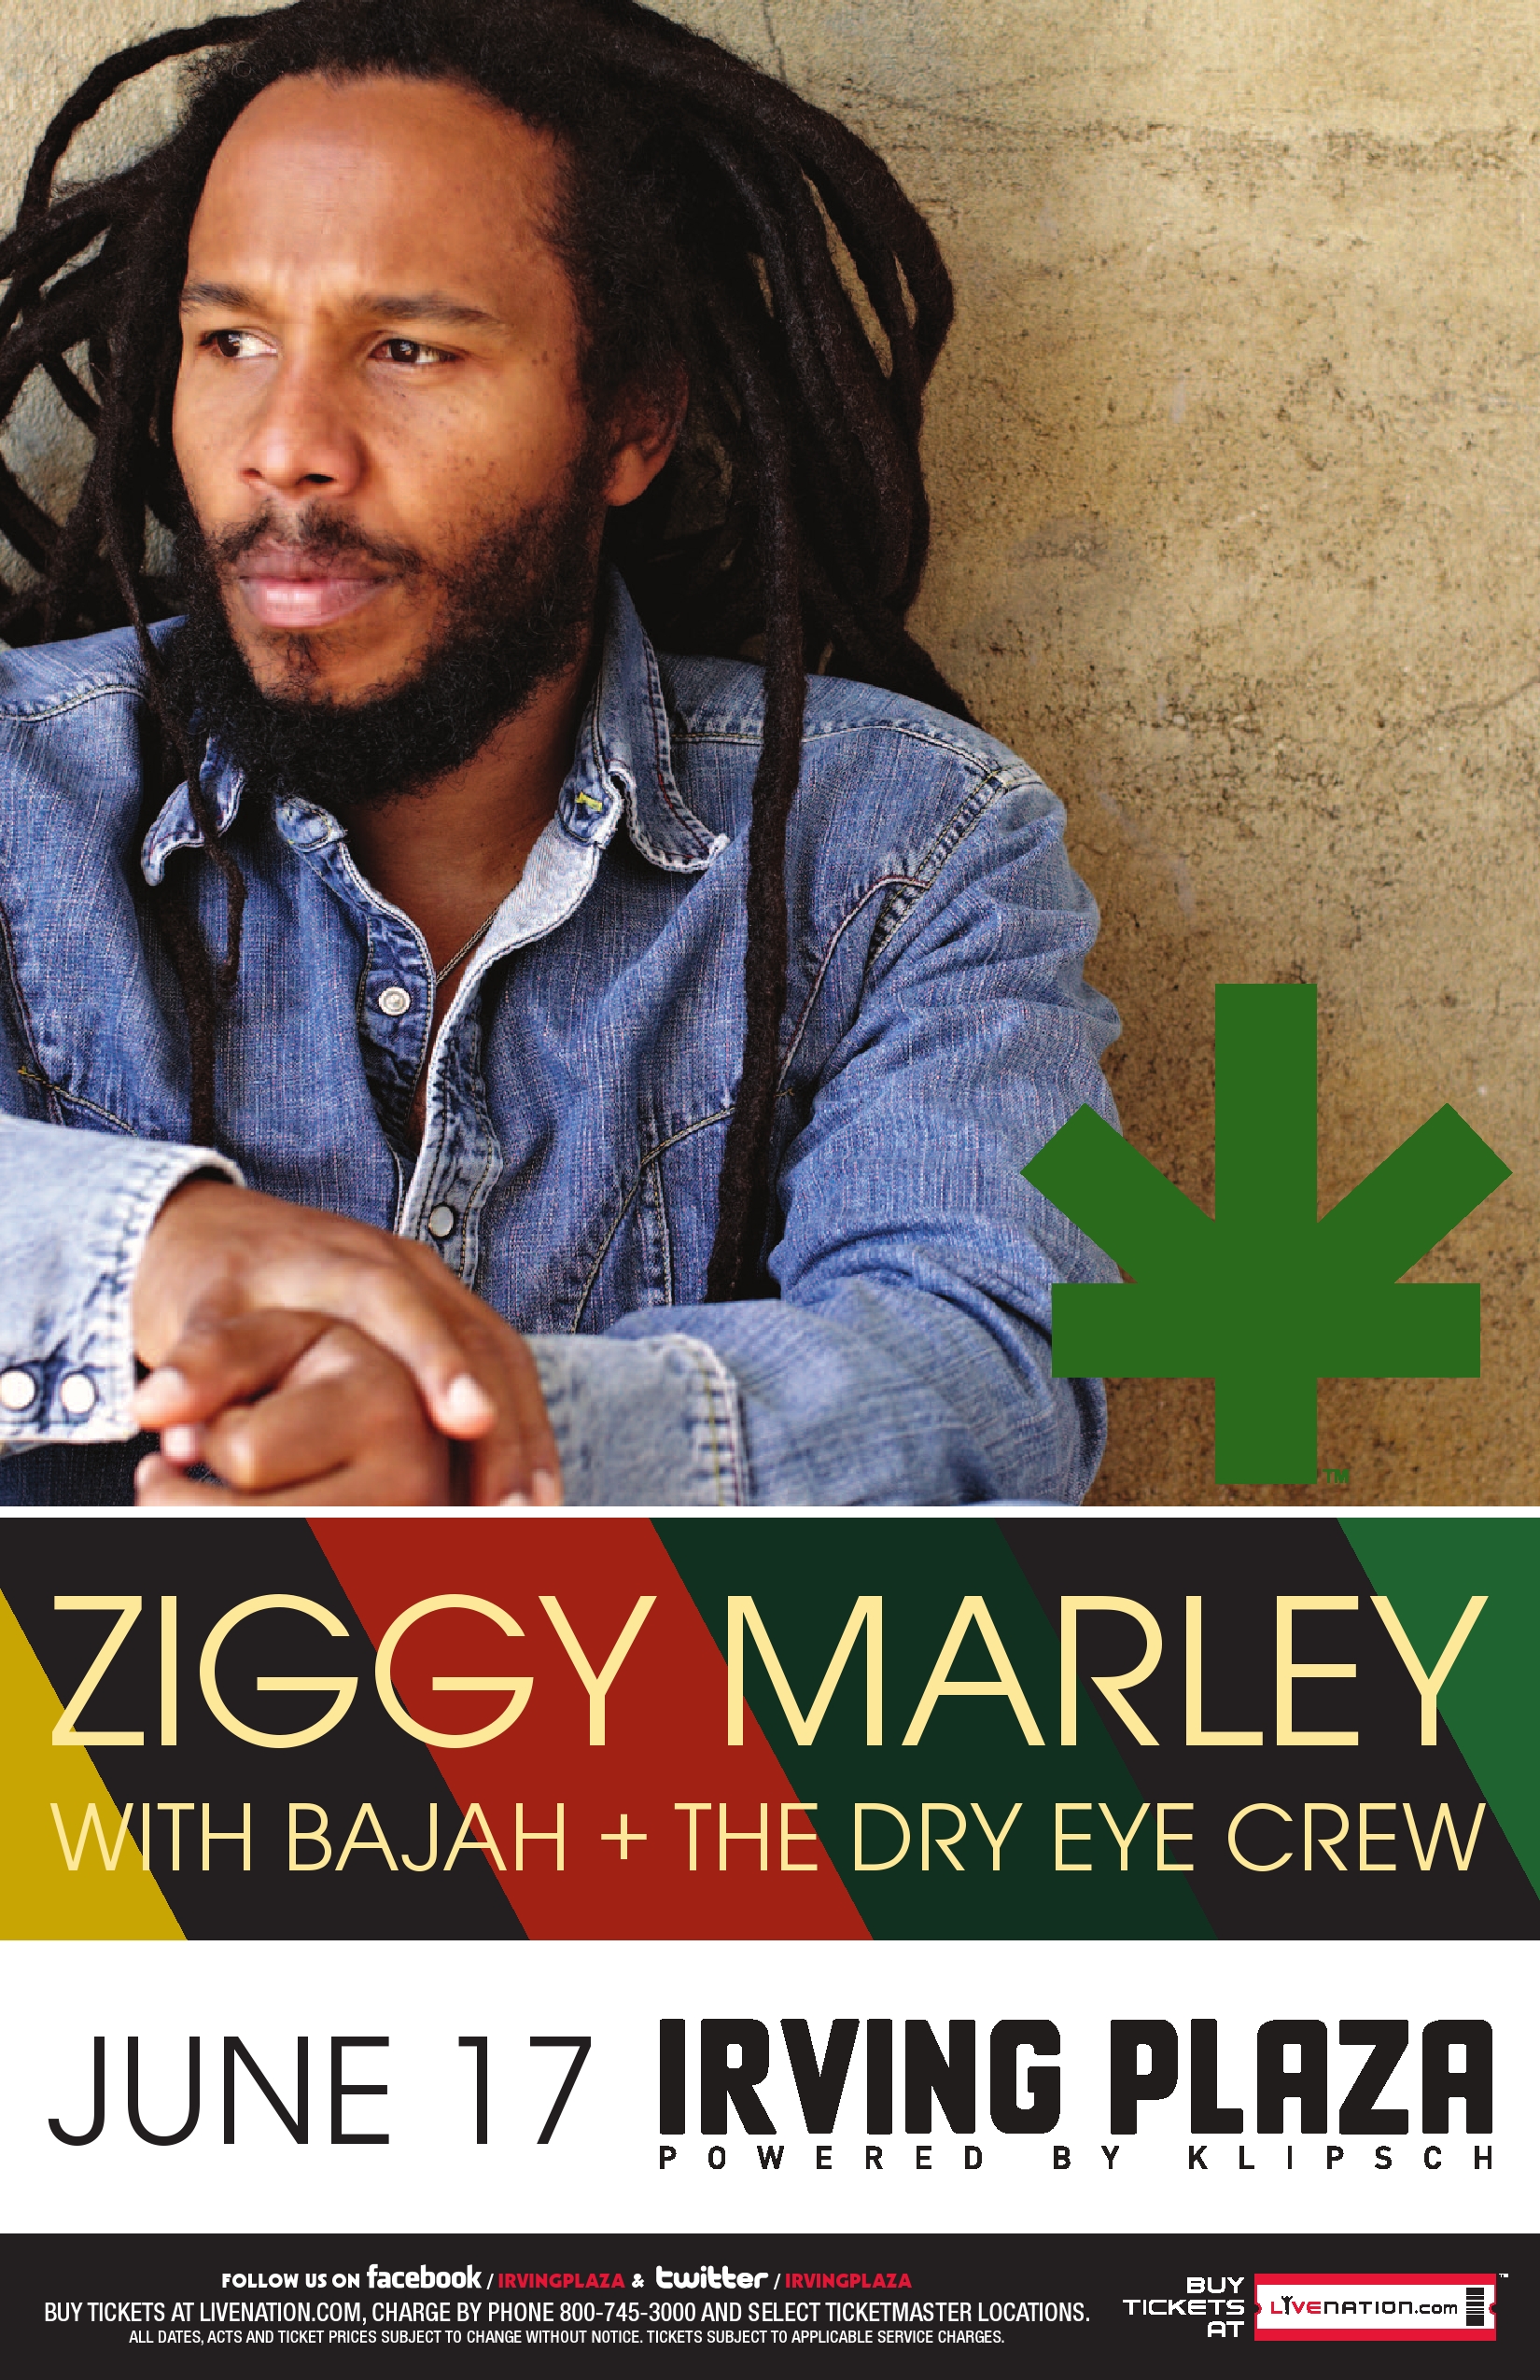 NYC: Win A Pair of Tickets to Ziggy Marley and Bajah + the Dry-Eyed Crew